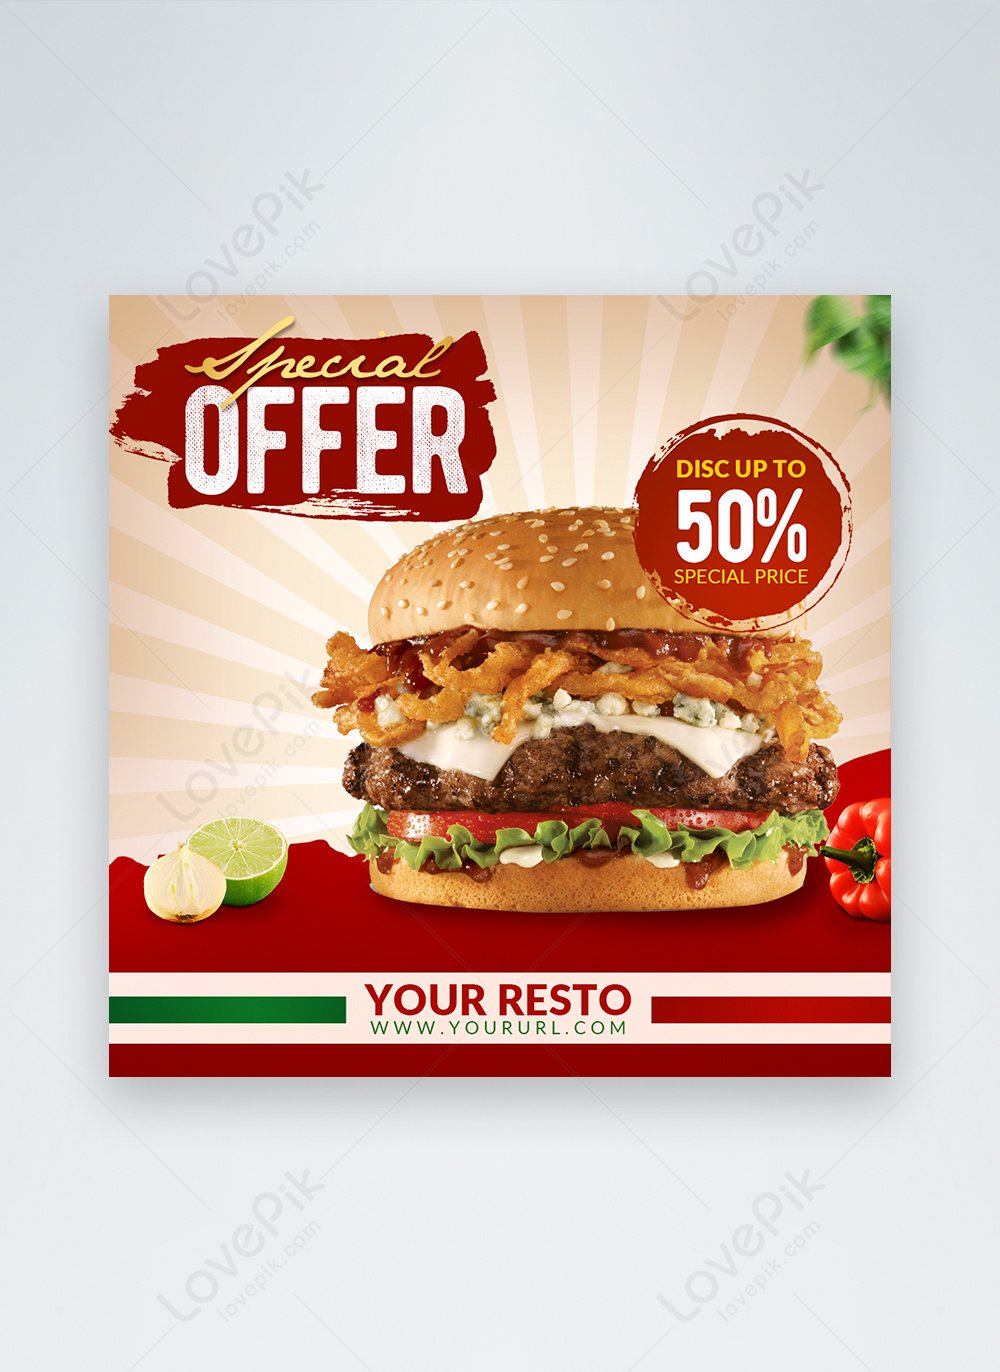 Discounted food offers